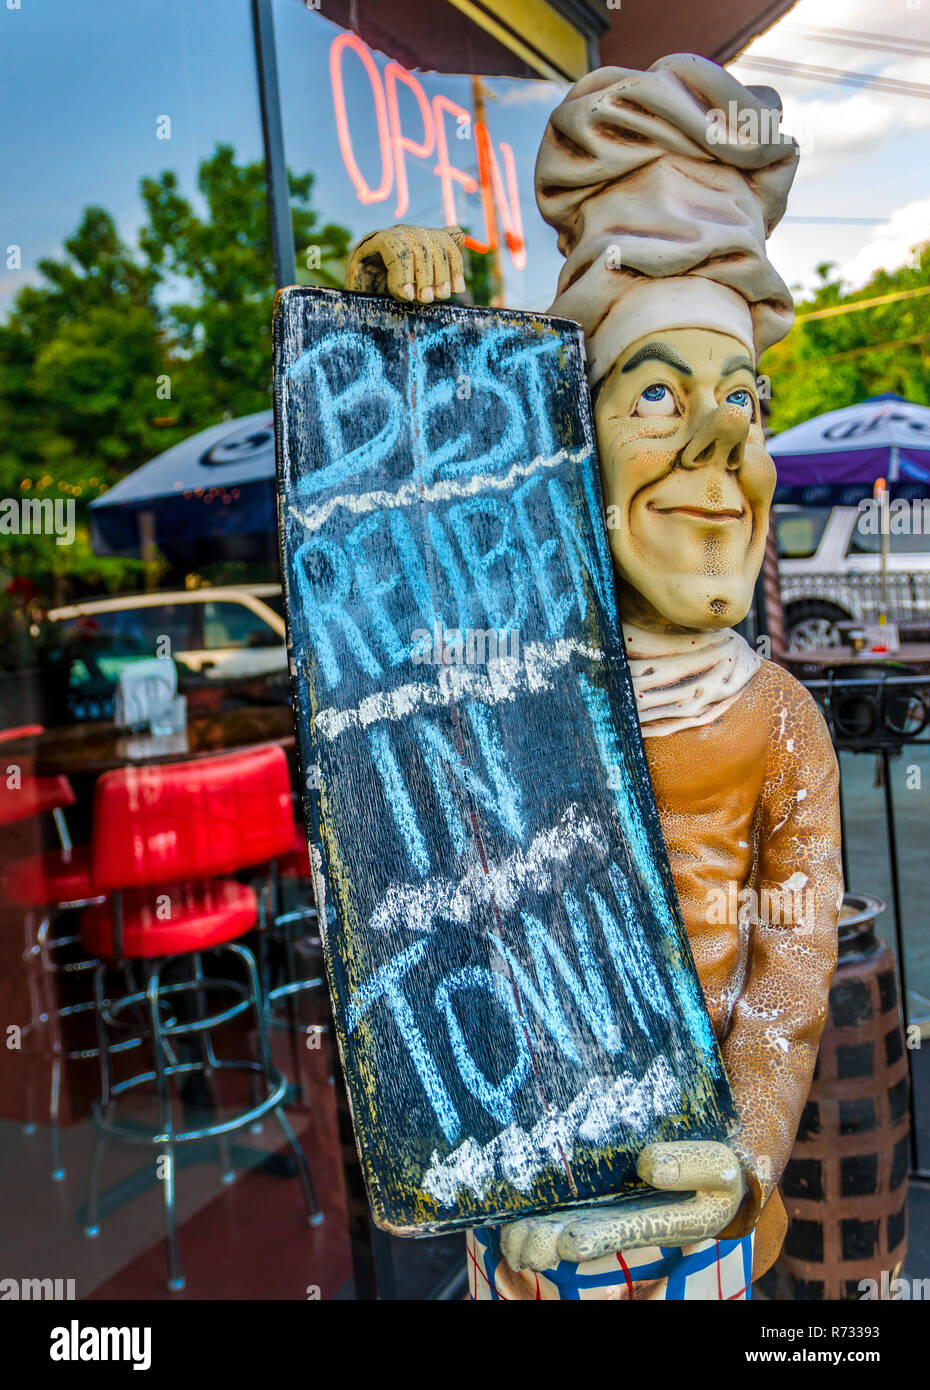 A statue holds a sign advertising the reuben sandwich at Chamblee Bistro in Chamblee, Georgia, May 20, 2014. Stock Photo